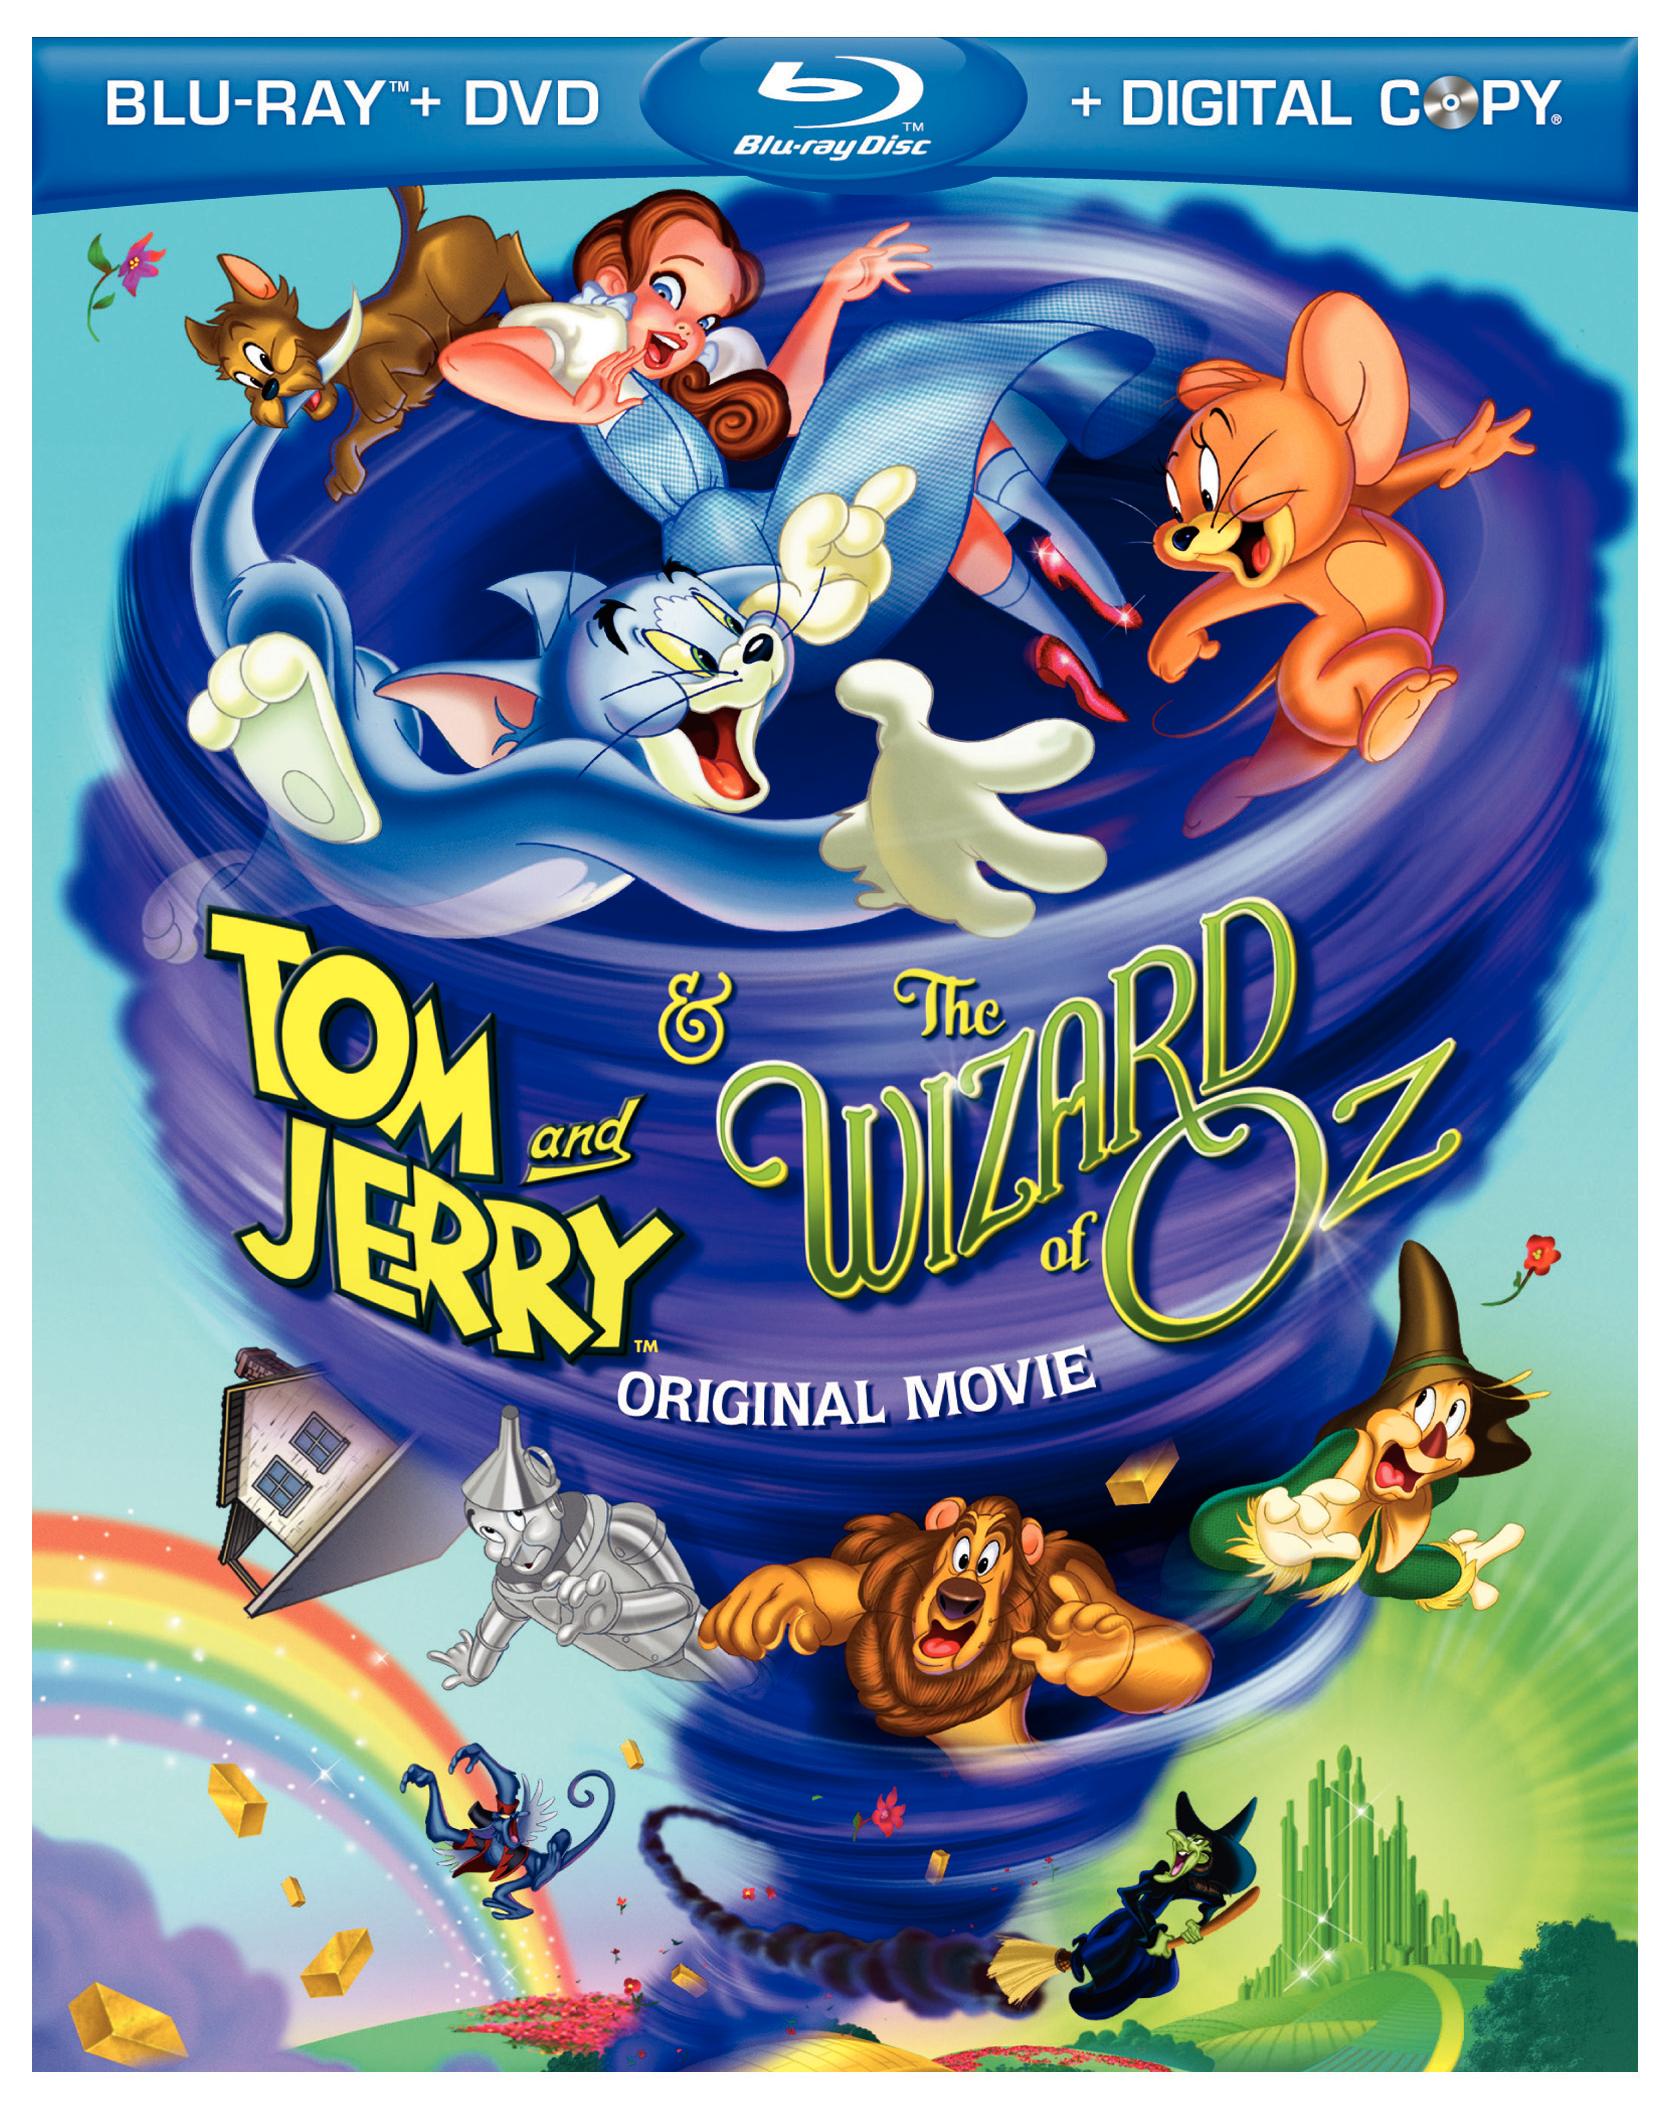 Tom and Jerry & The Wizard of Oz Blu-Ray + DVD Review ...
